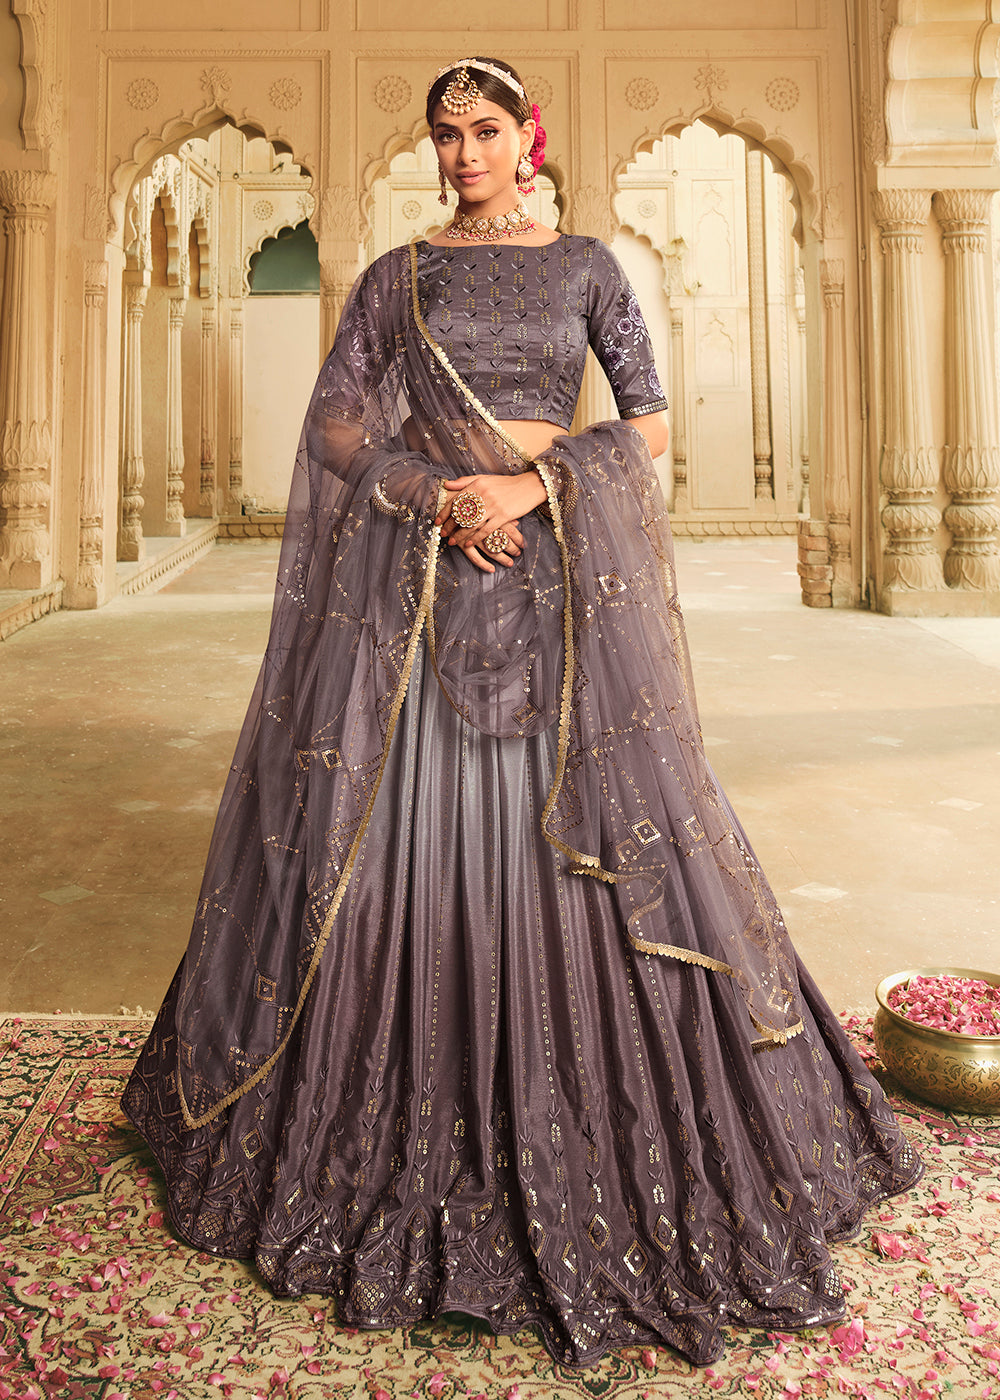 Buy Now Dusty Purple Multi Color Sequins Festive Lehenga Choli Online in USA, UK, Canada & Worldwide at Empress Clothing.